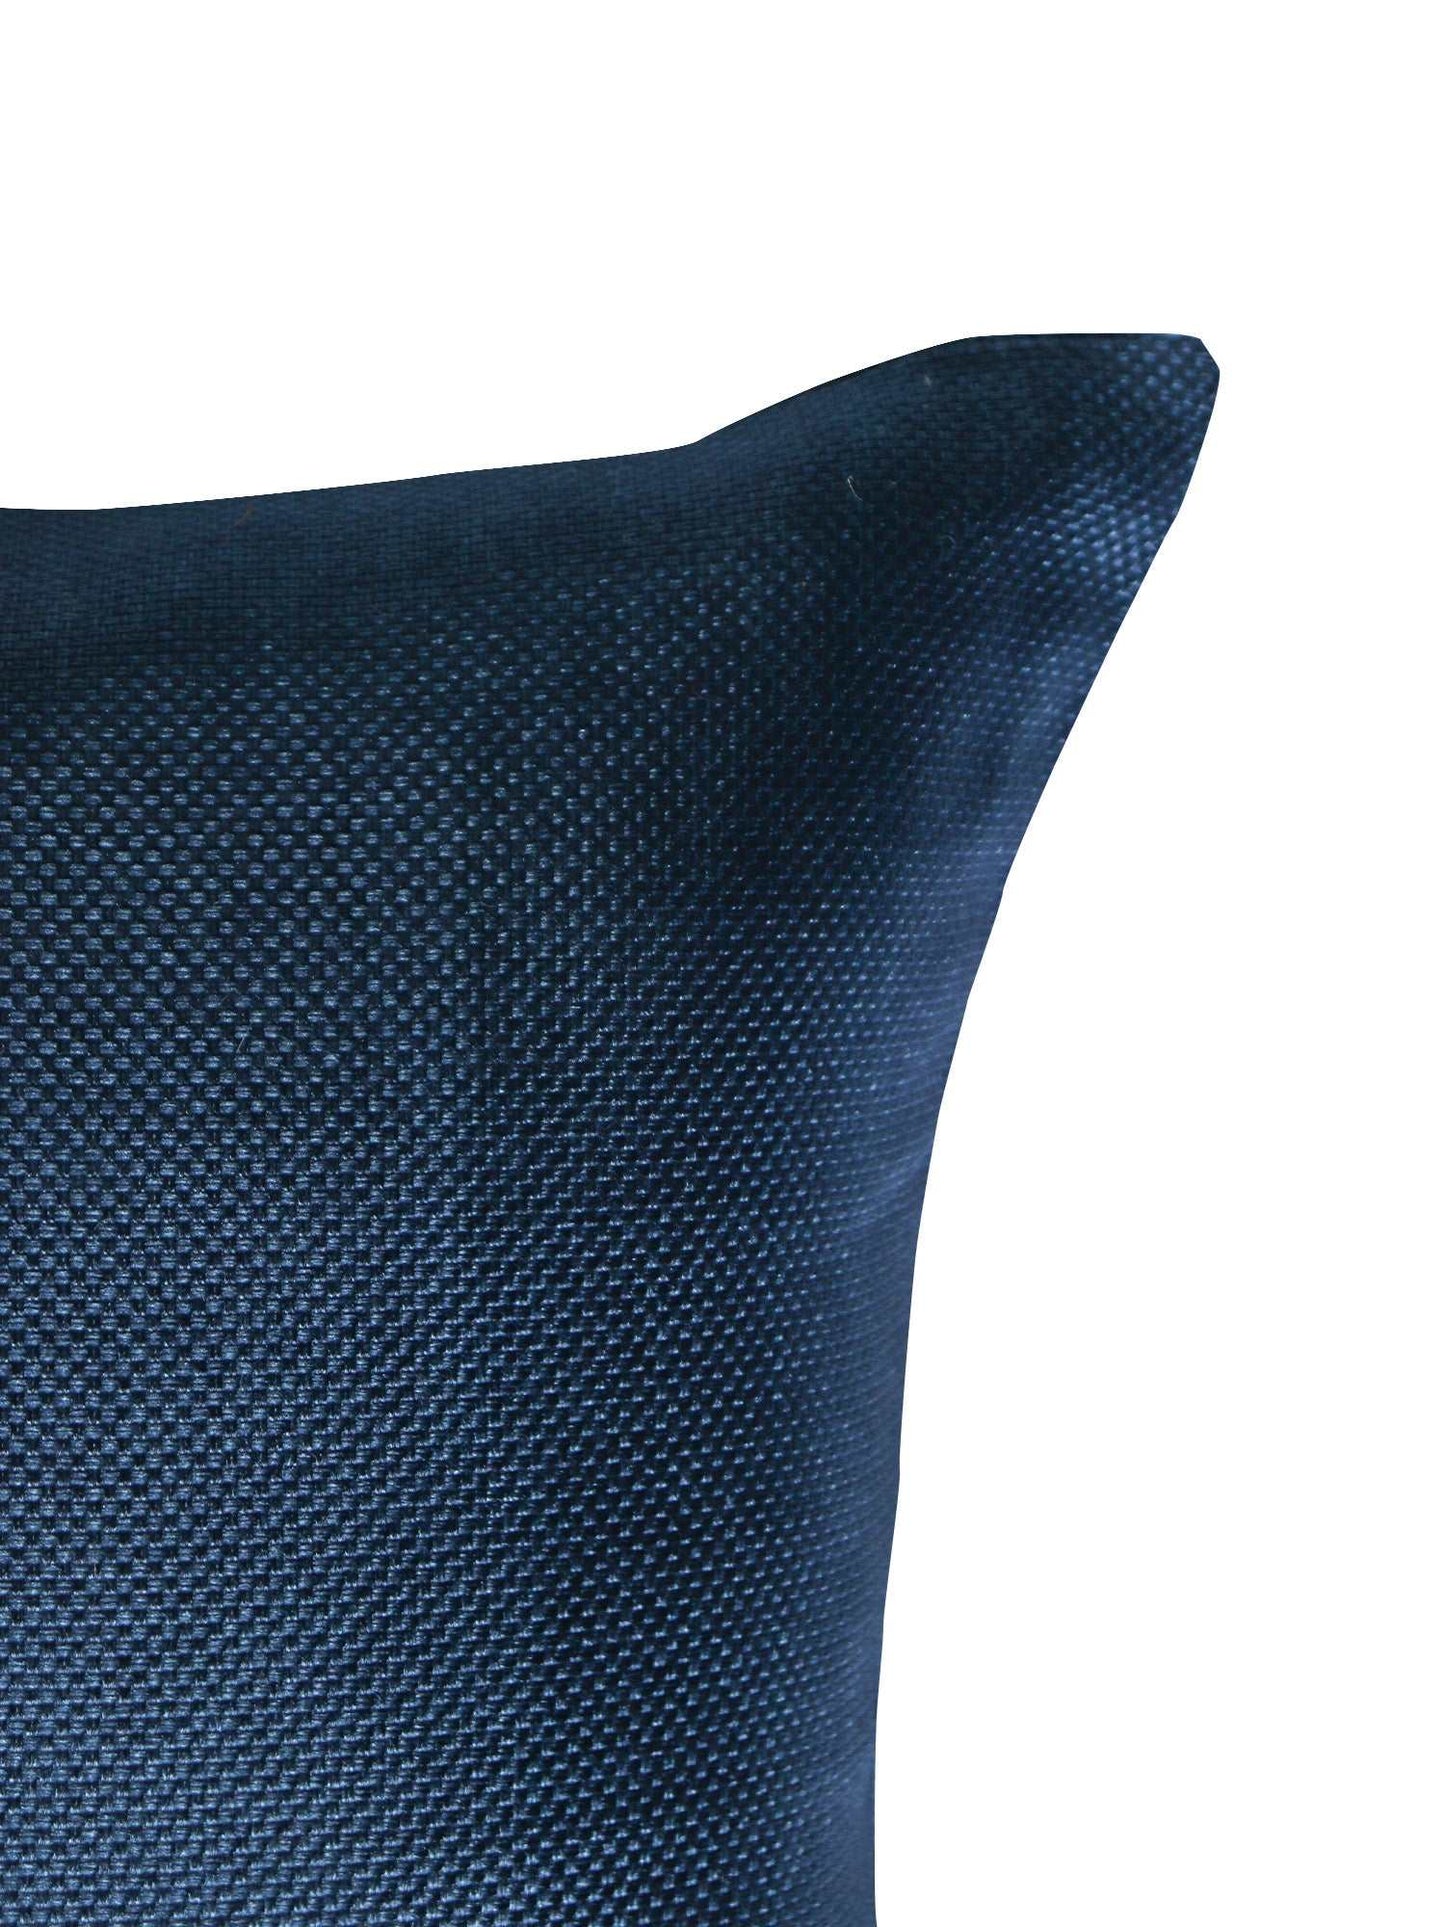 Cushion Cover (Euroshams) for Sofa, Bed Cotton Blend | Self Textured | Blue - 24x24in(61x61cm) (Pack of 1)